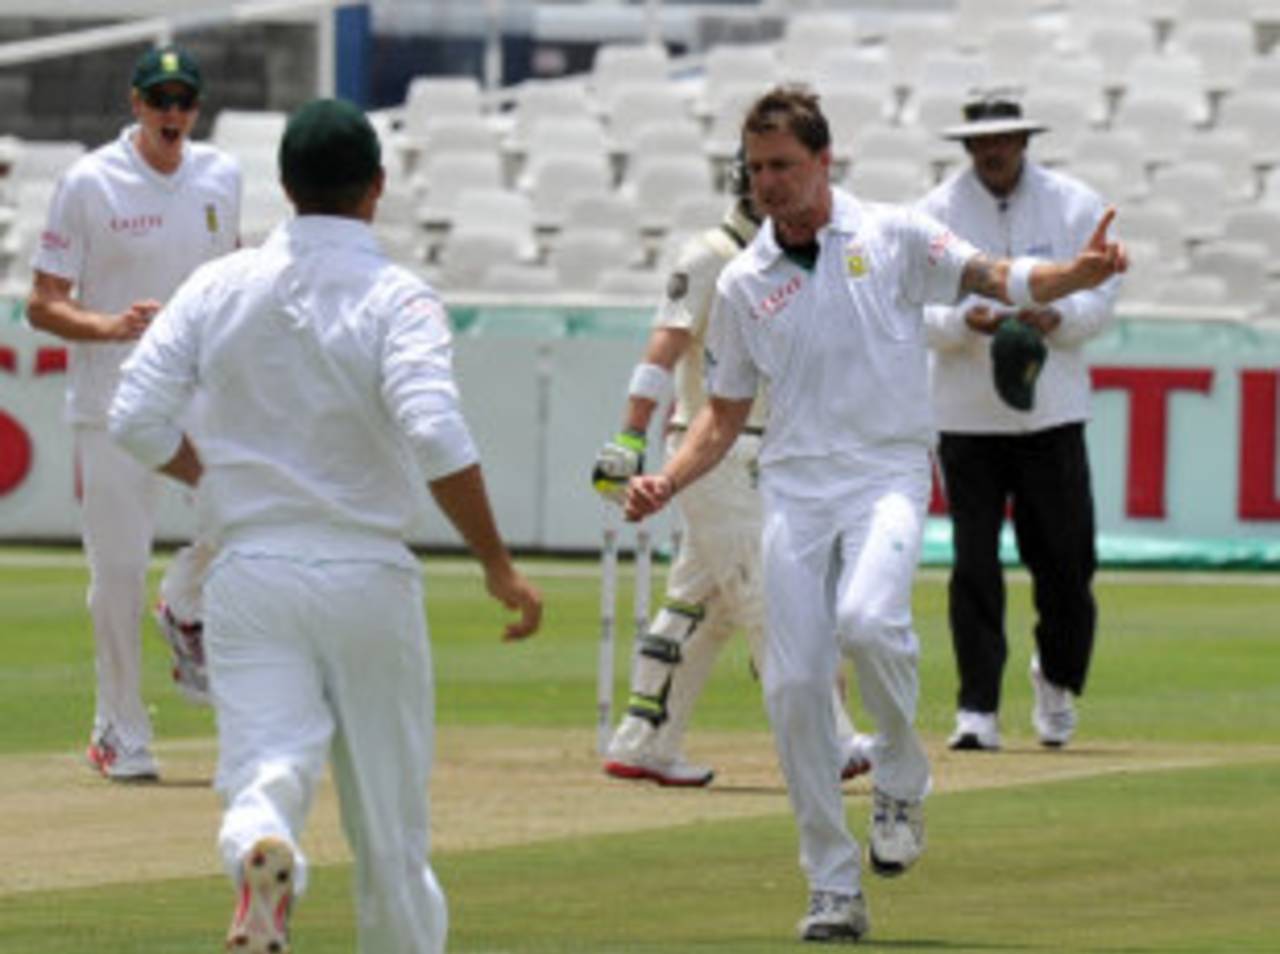 Dale Steyn found the bowling rhythm he appeared to be missing during the one-day series&nbsp;&nbsp;&bull;&nbsp;&nbsp;AFP